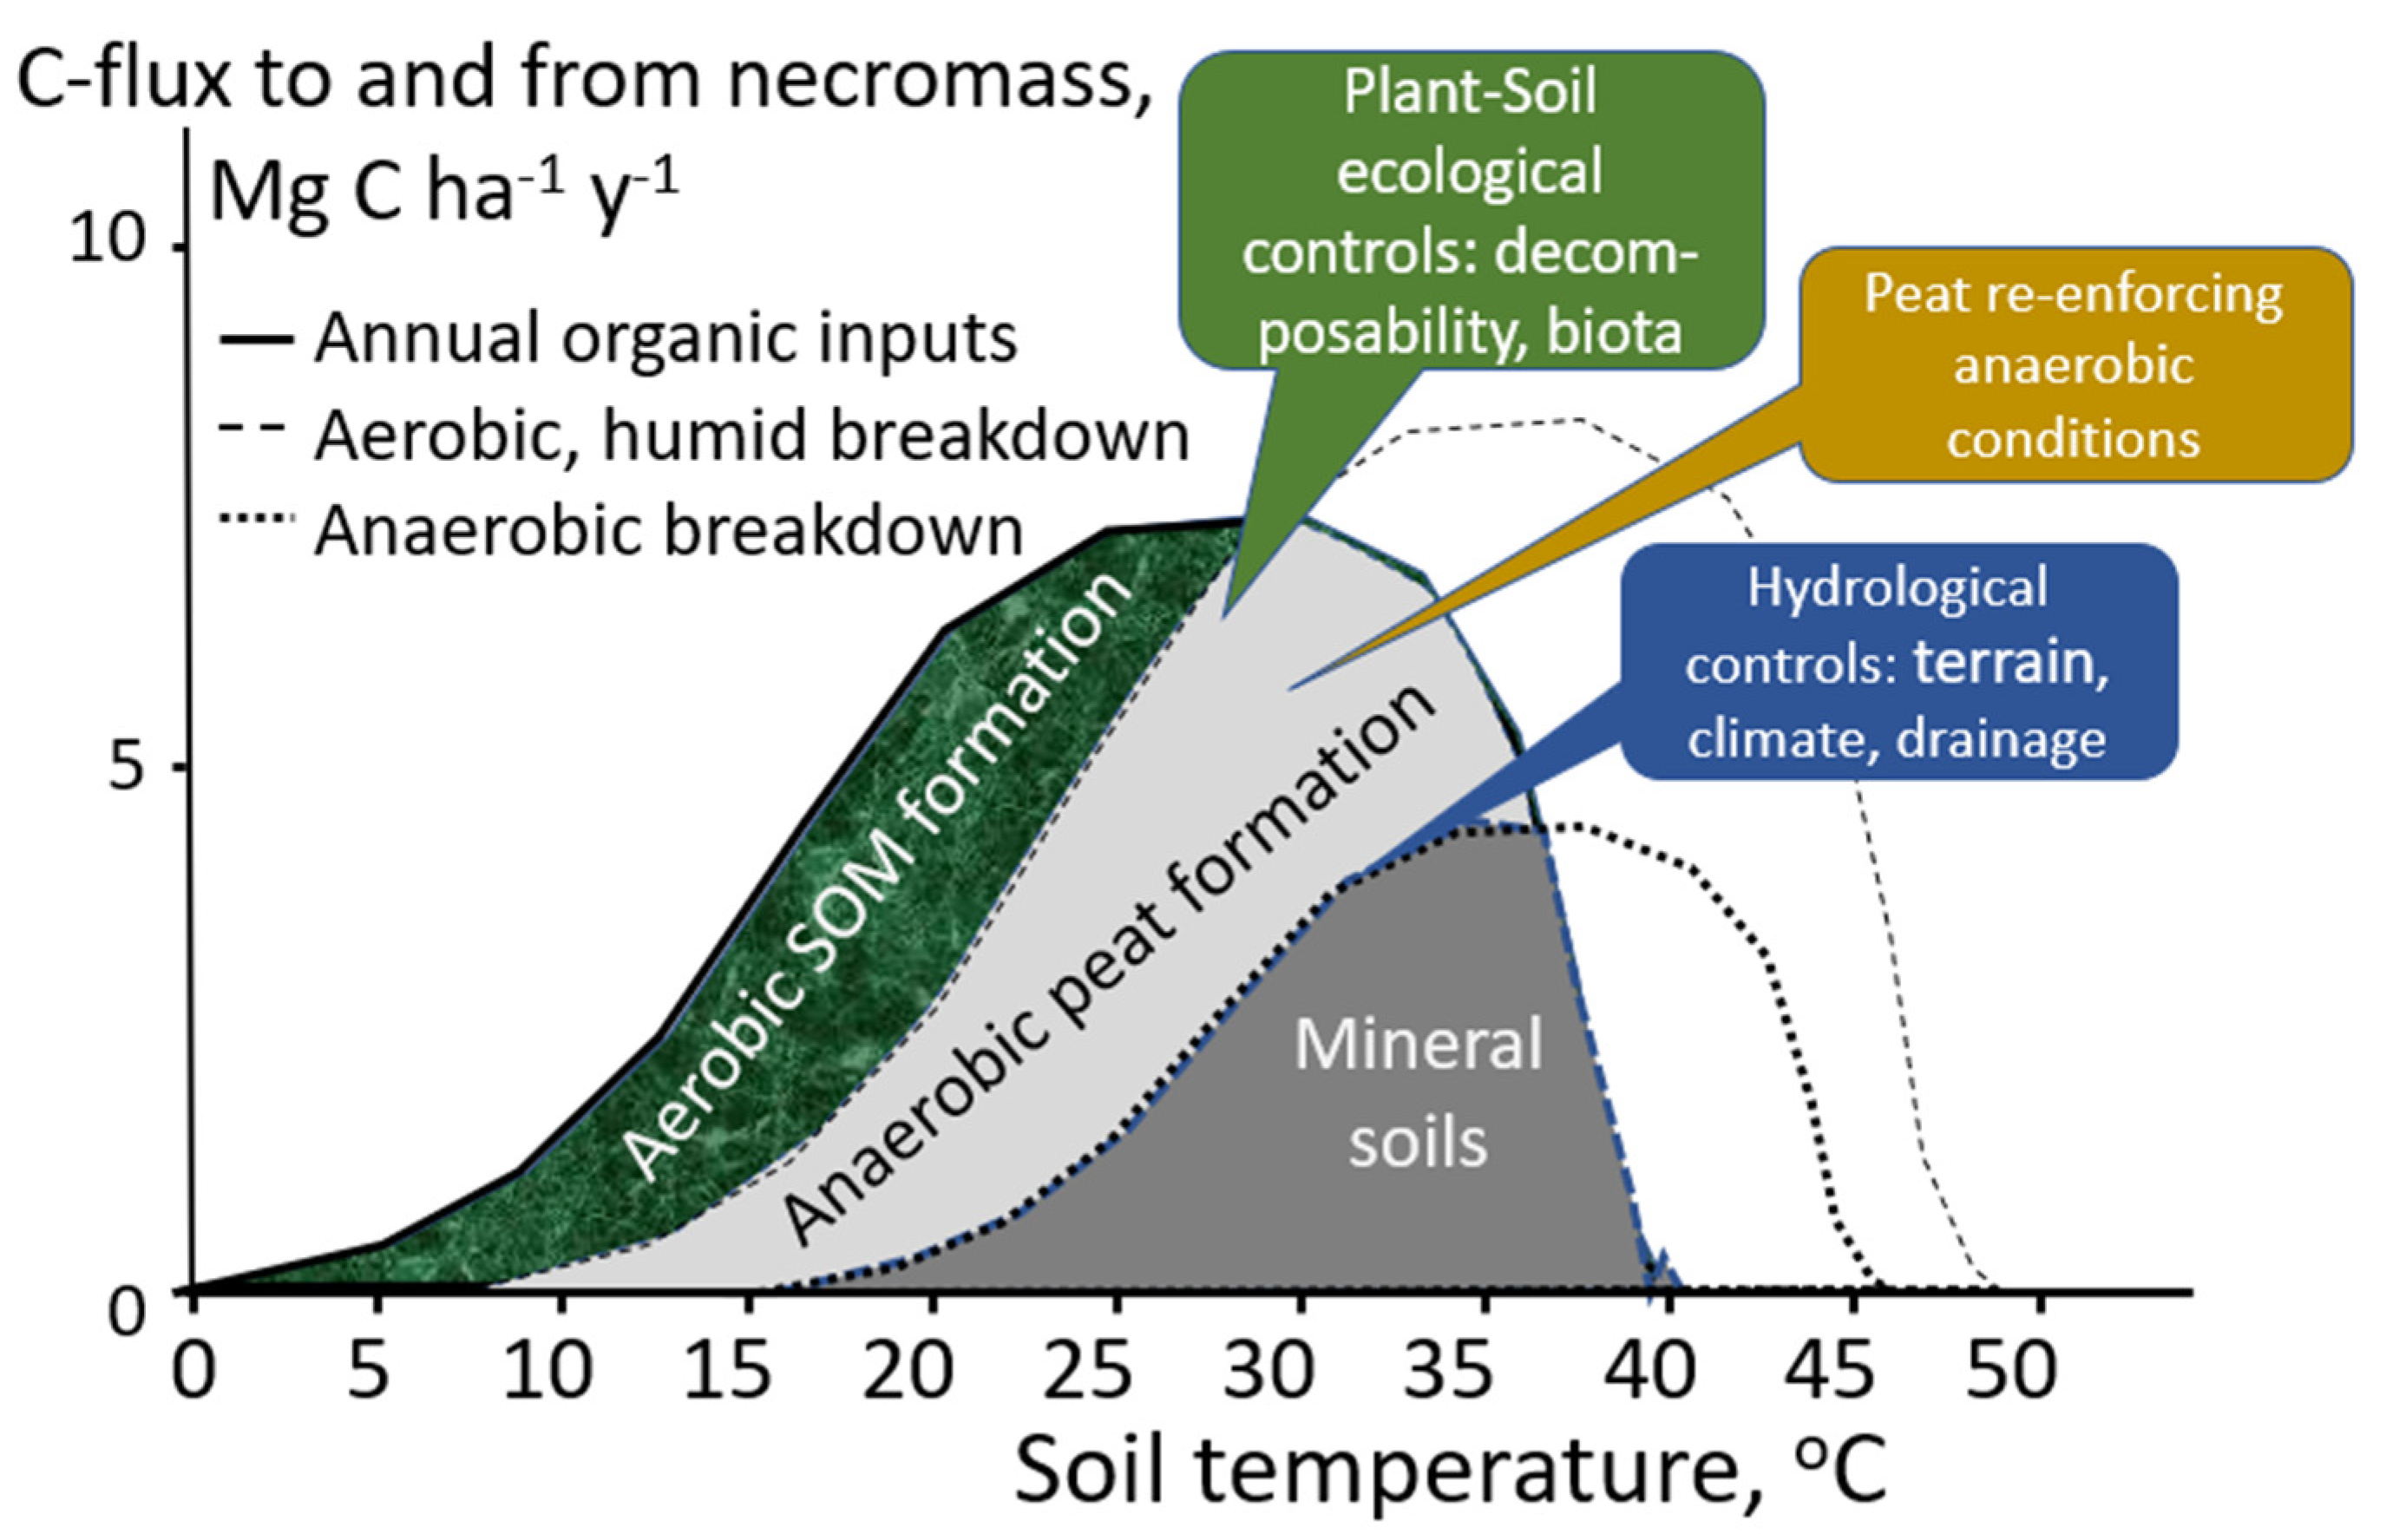 Soil Systems | Free Full-Text | Litter Wet Rubber and Fruit Agroforests: Below the Threshold for Tropical Peat Formation